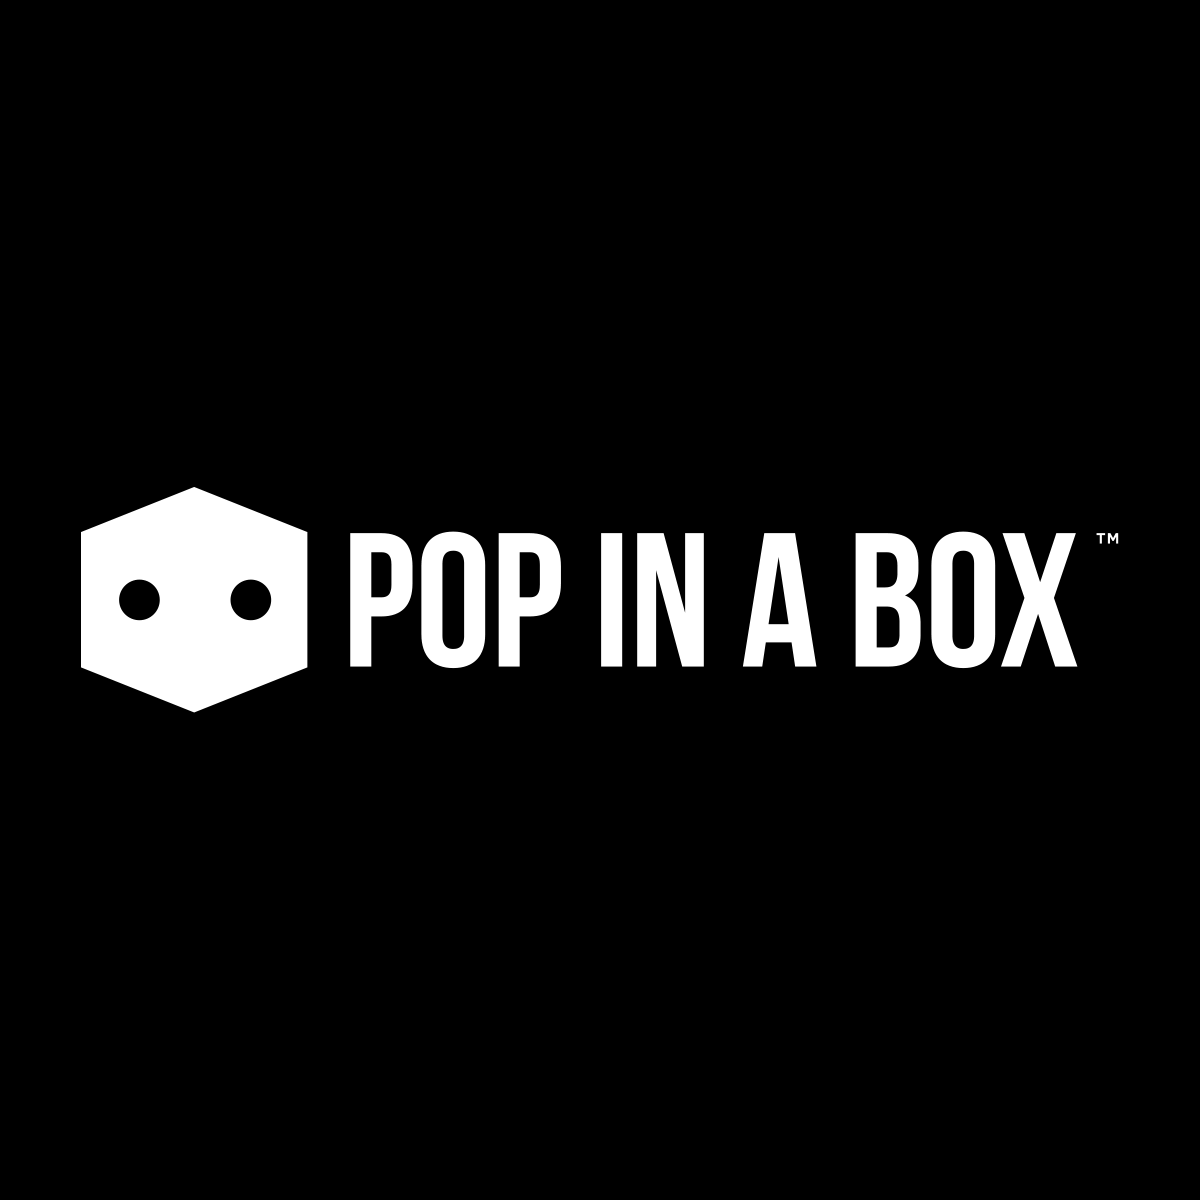 10% Off With Pop In A Box UK Promotion Code